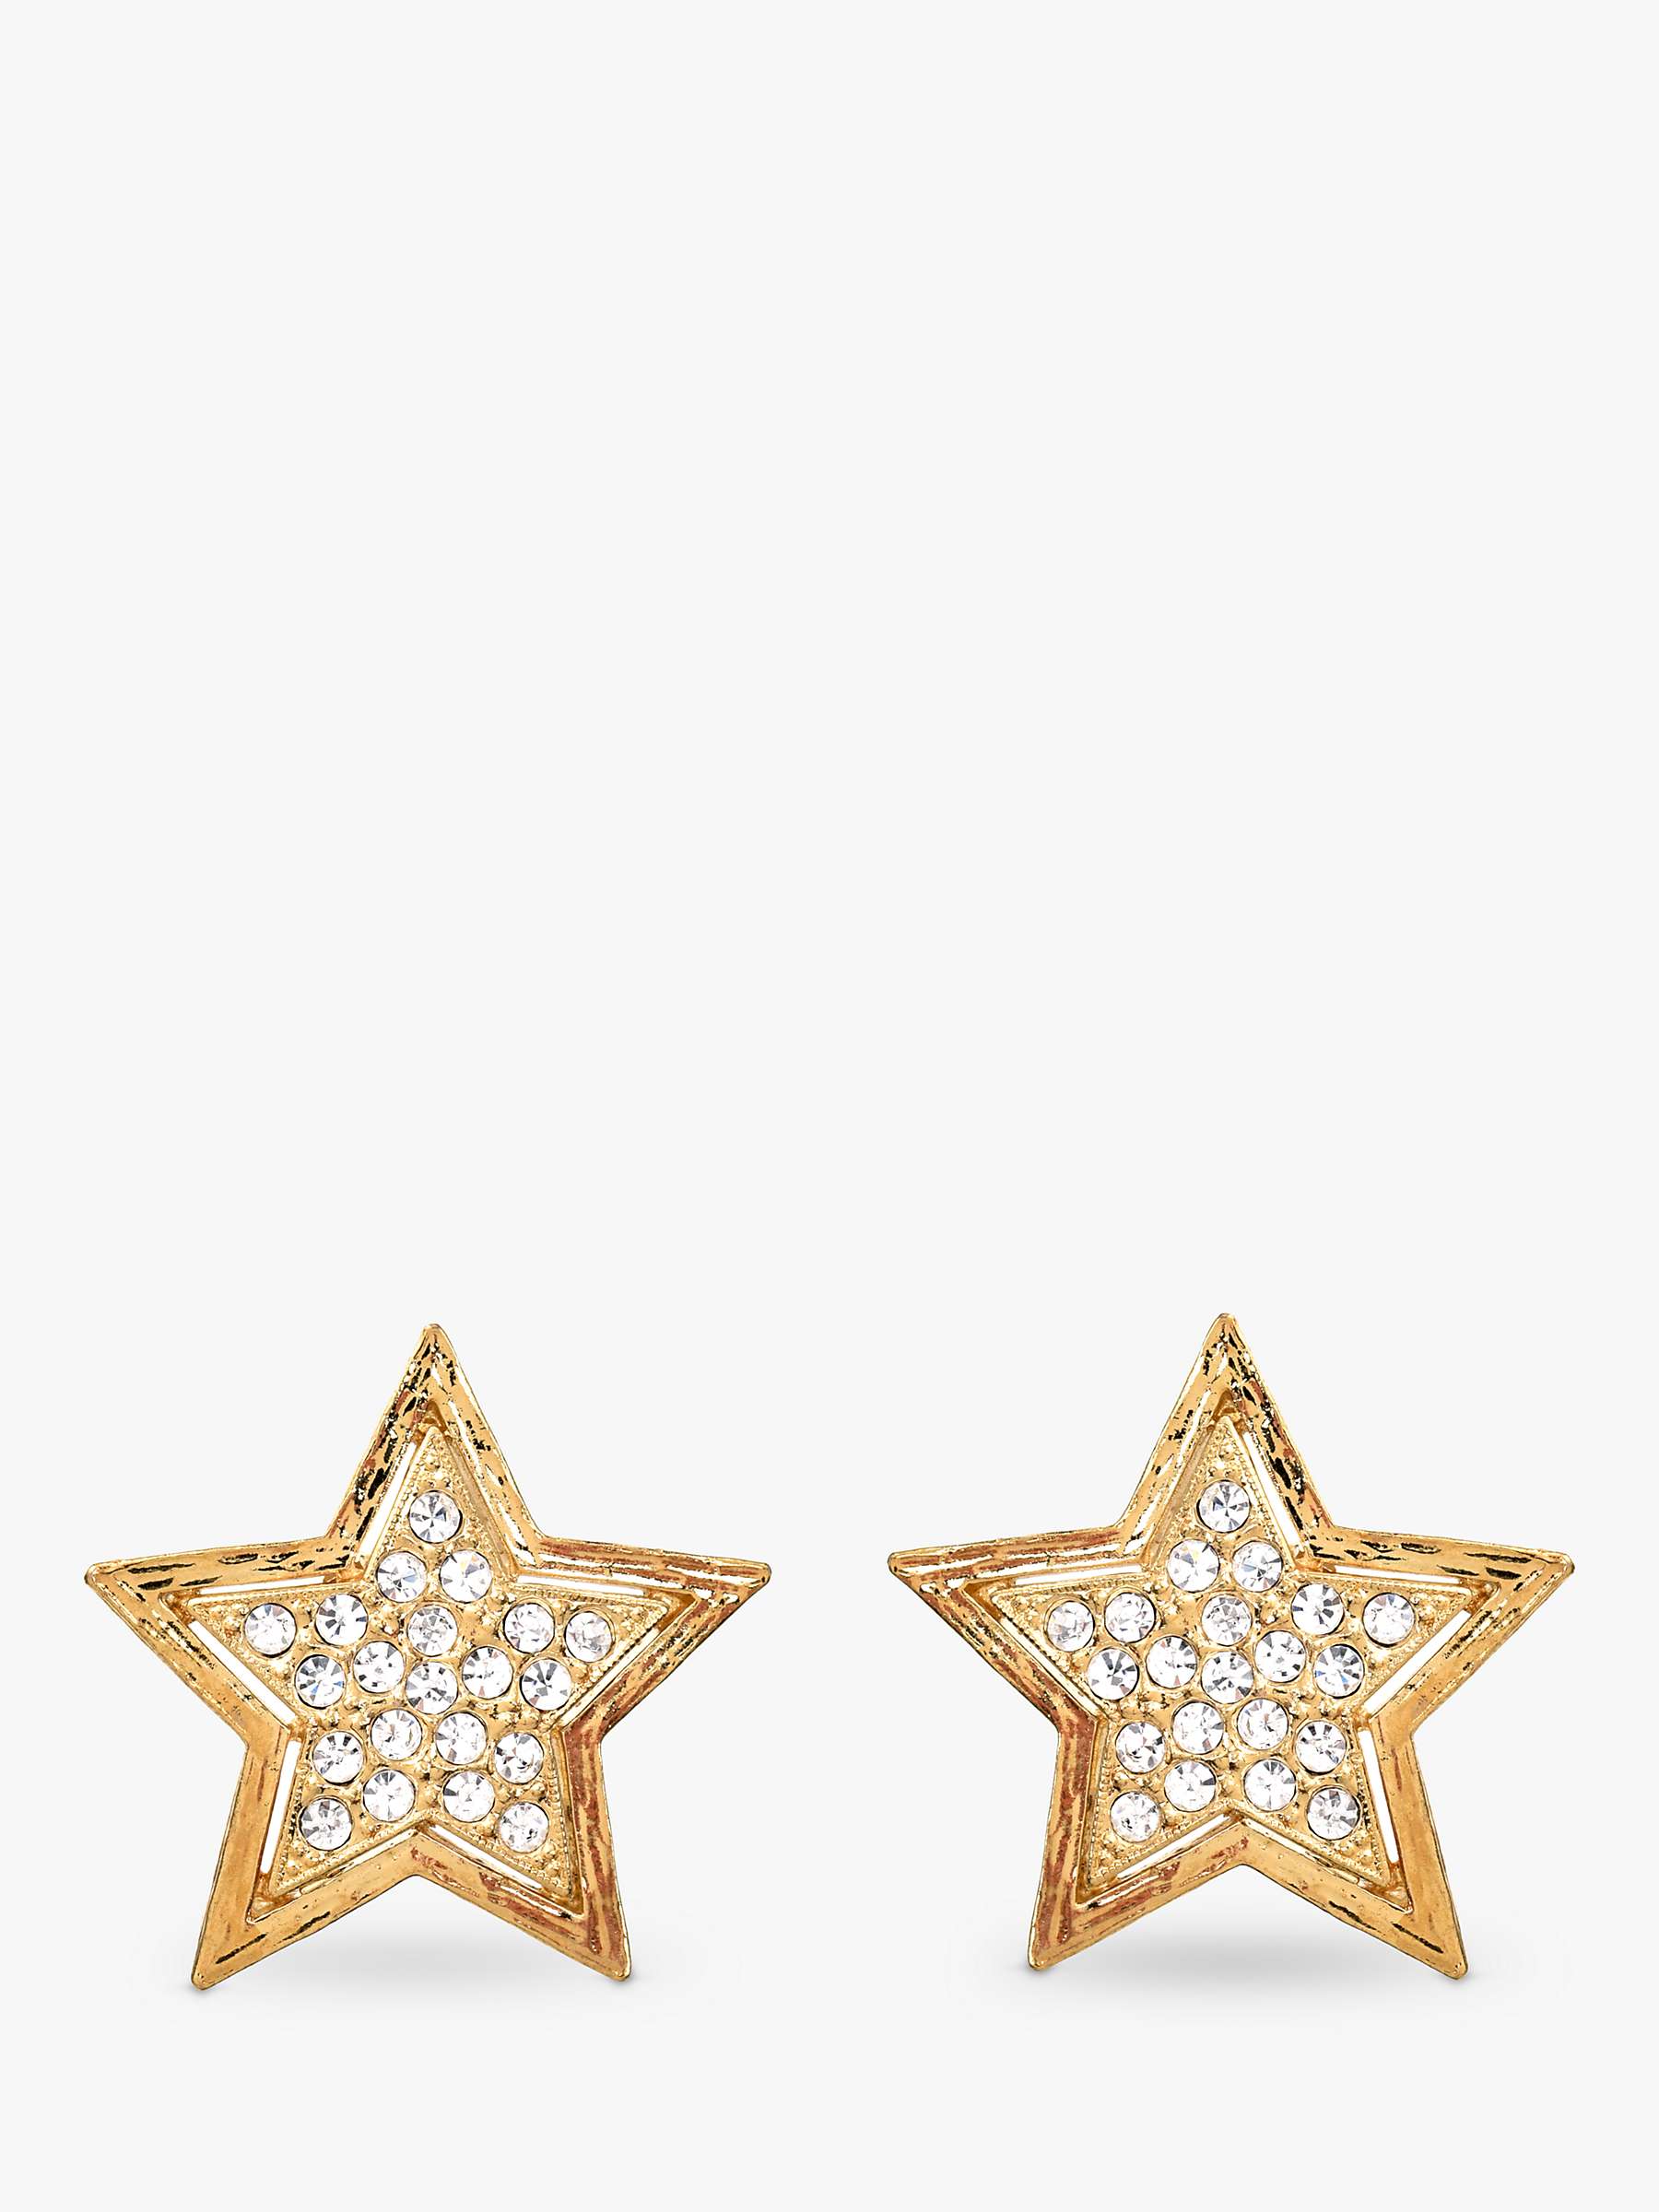 Buy Eclectica Vintage Star Emblem Clip On Earrings, Dated Circa 1980s, Gold Online at johnlewis.com